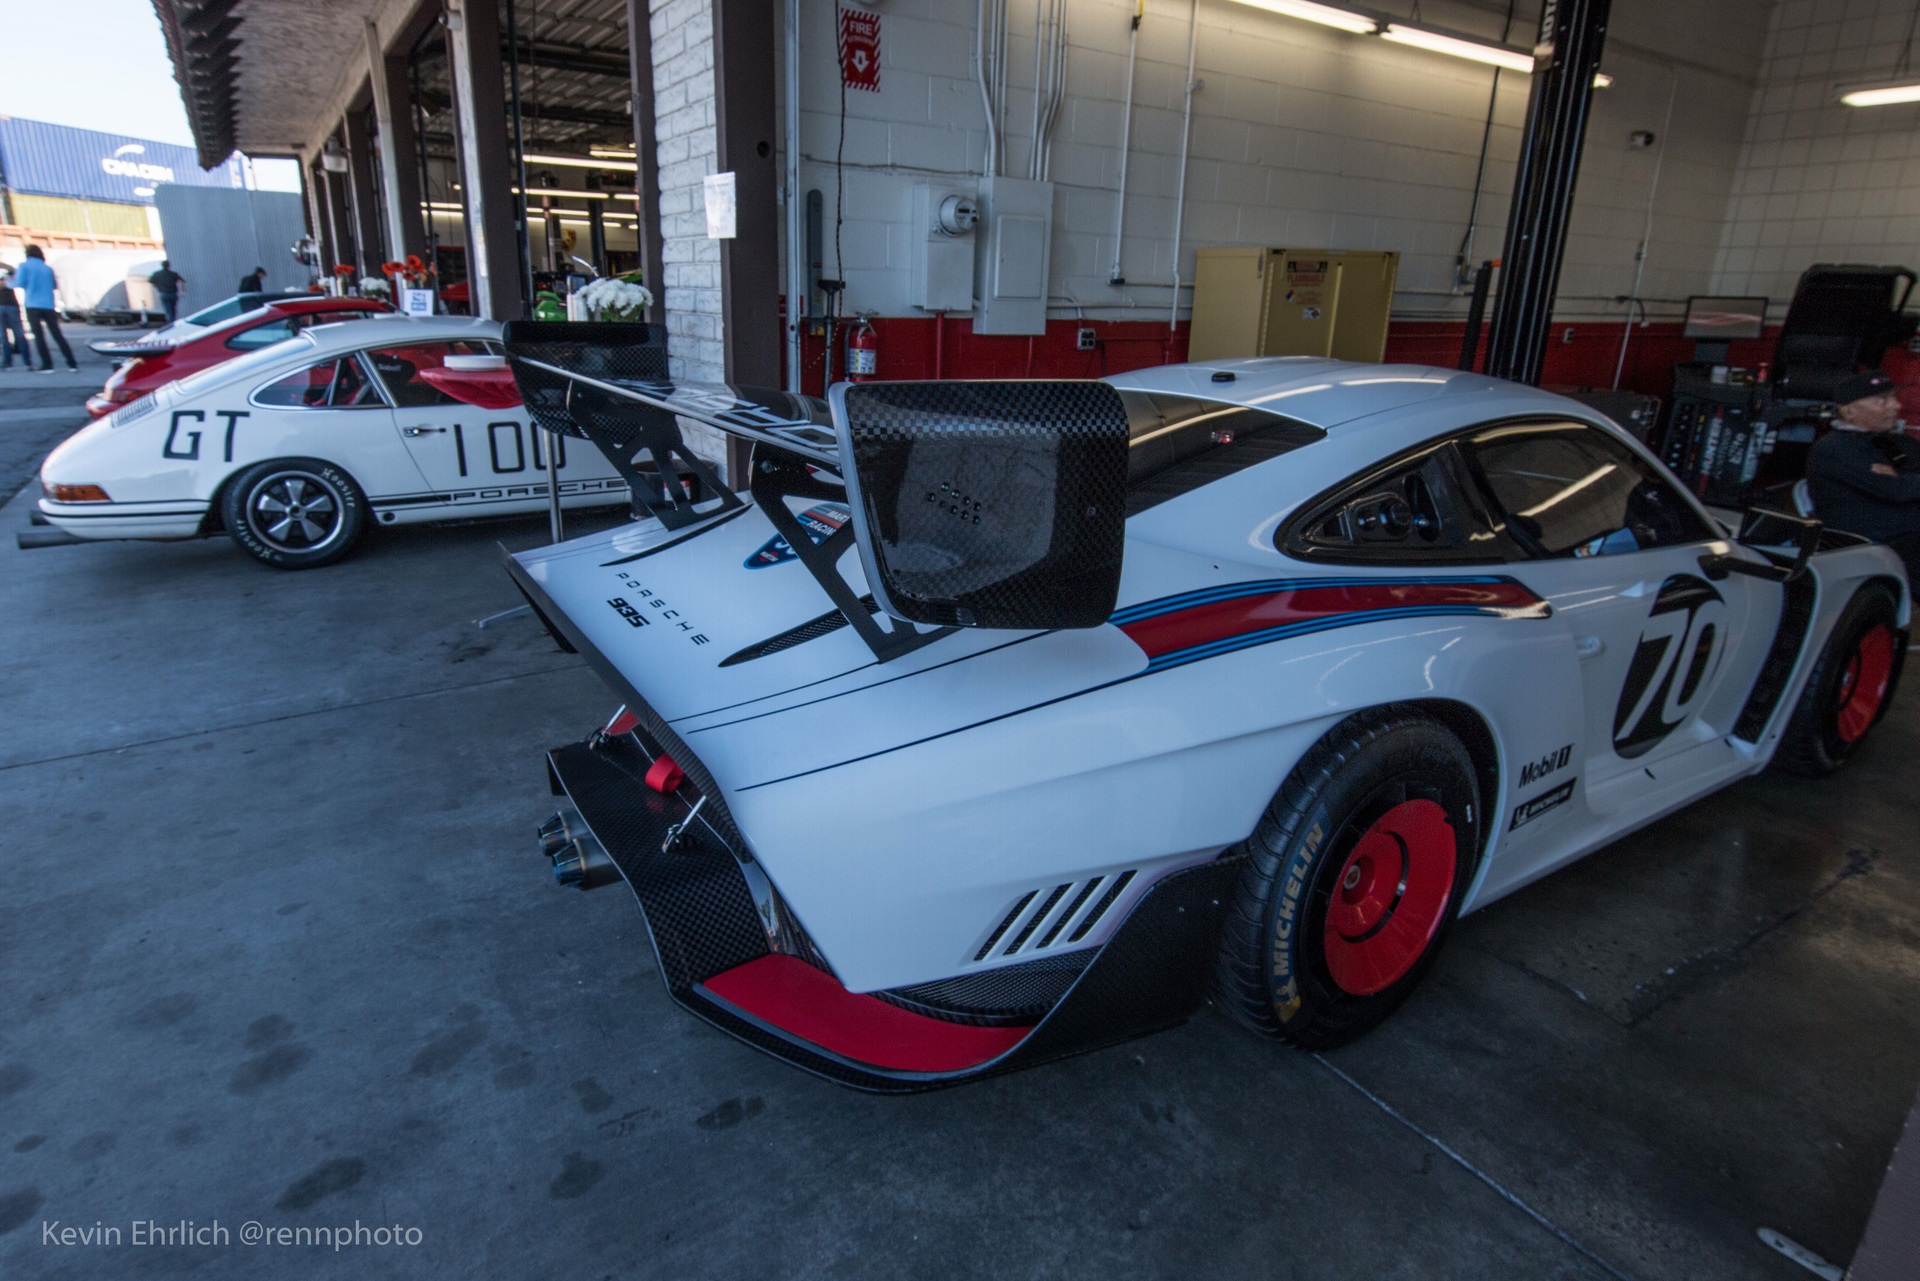 Porsche 935/19 with Martini wrap livery on display during 2022 Lit Show in LA